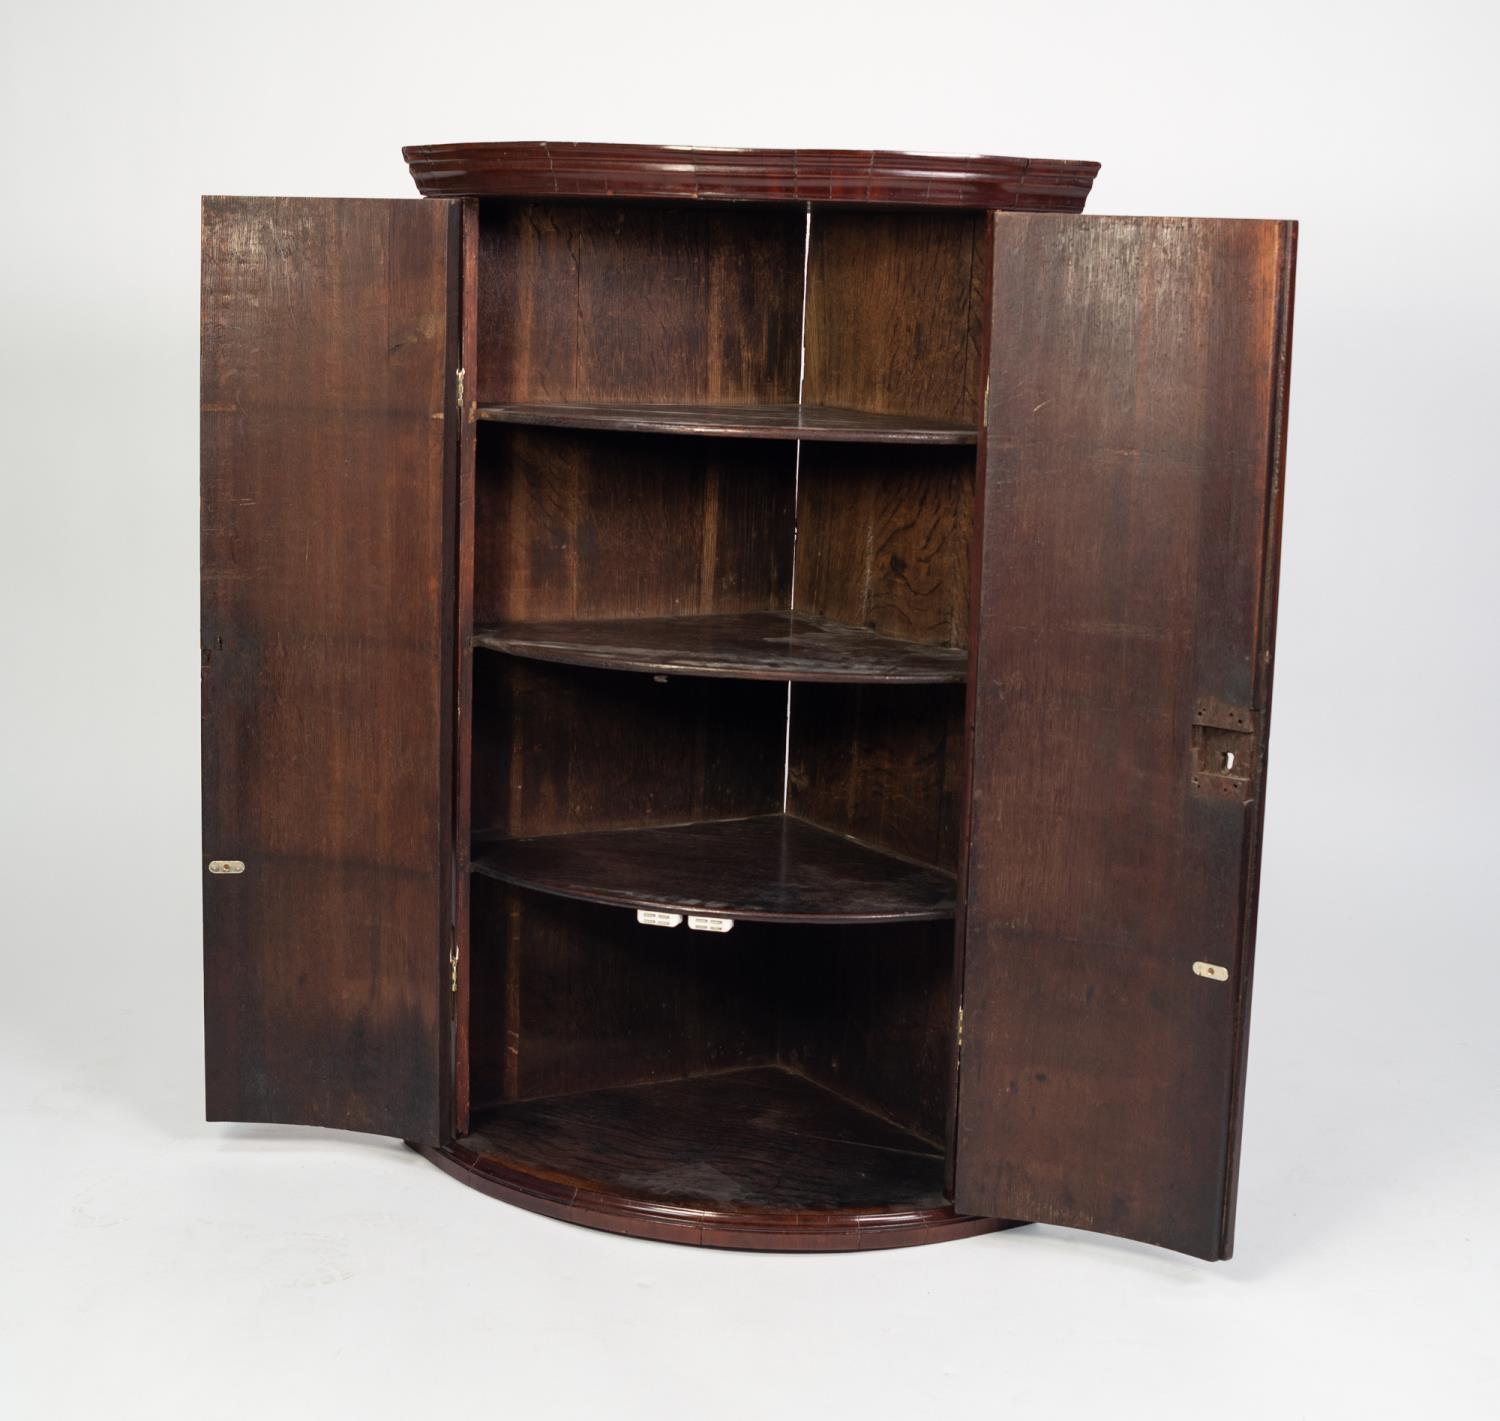 GEORGE III MAHOGANY BOW FRONTED CORNER CUPBOARD, of typical form with moulded cornice, exposed brass - Image 2 of 2